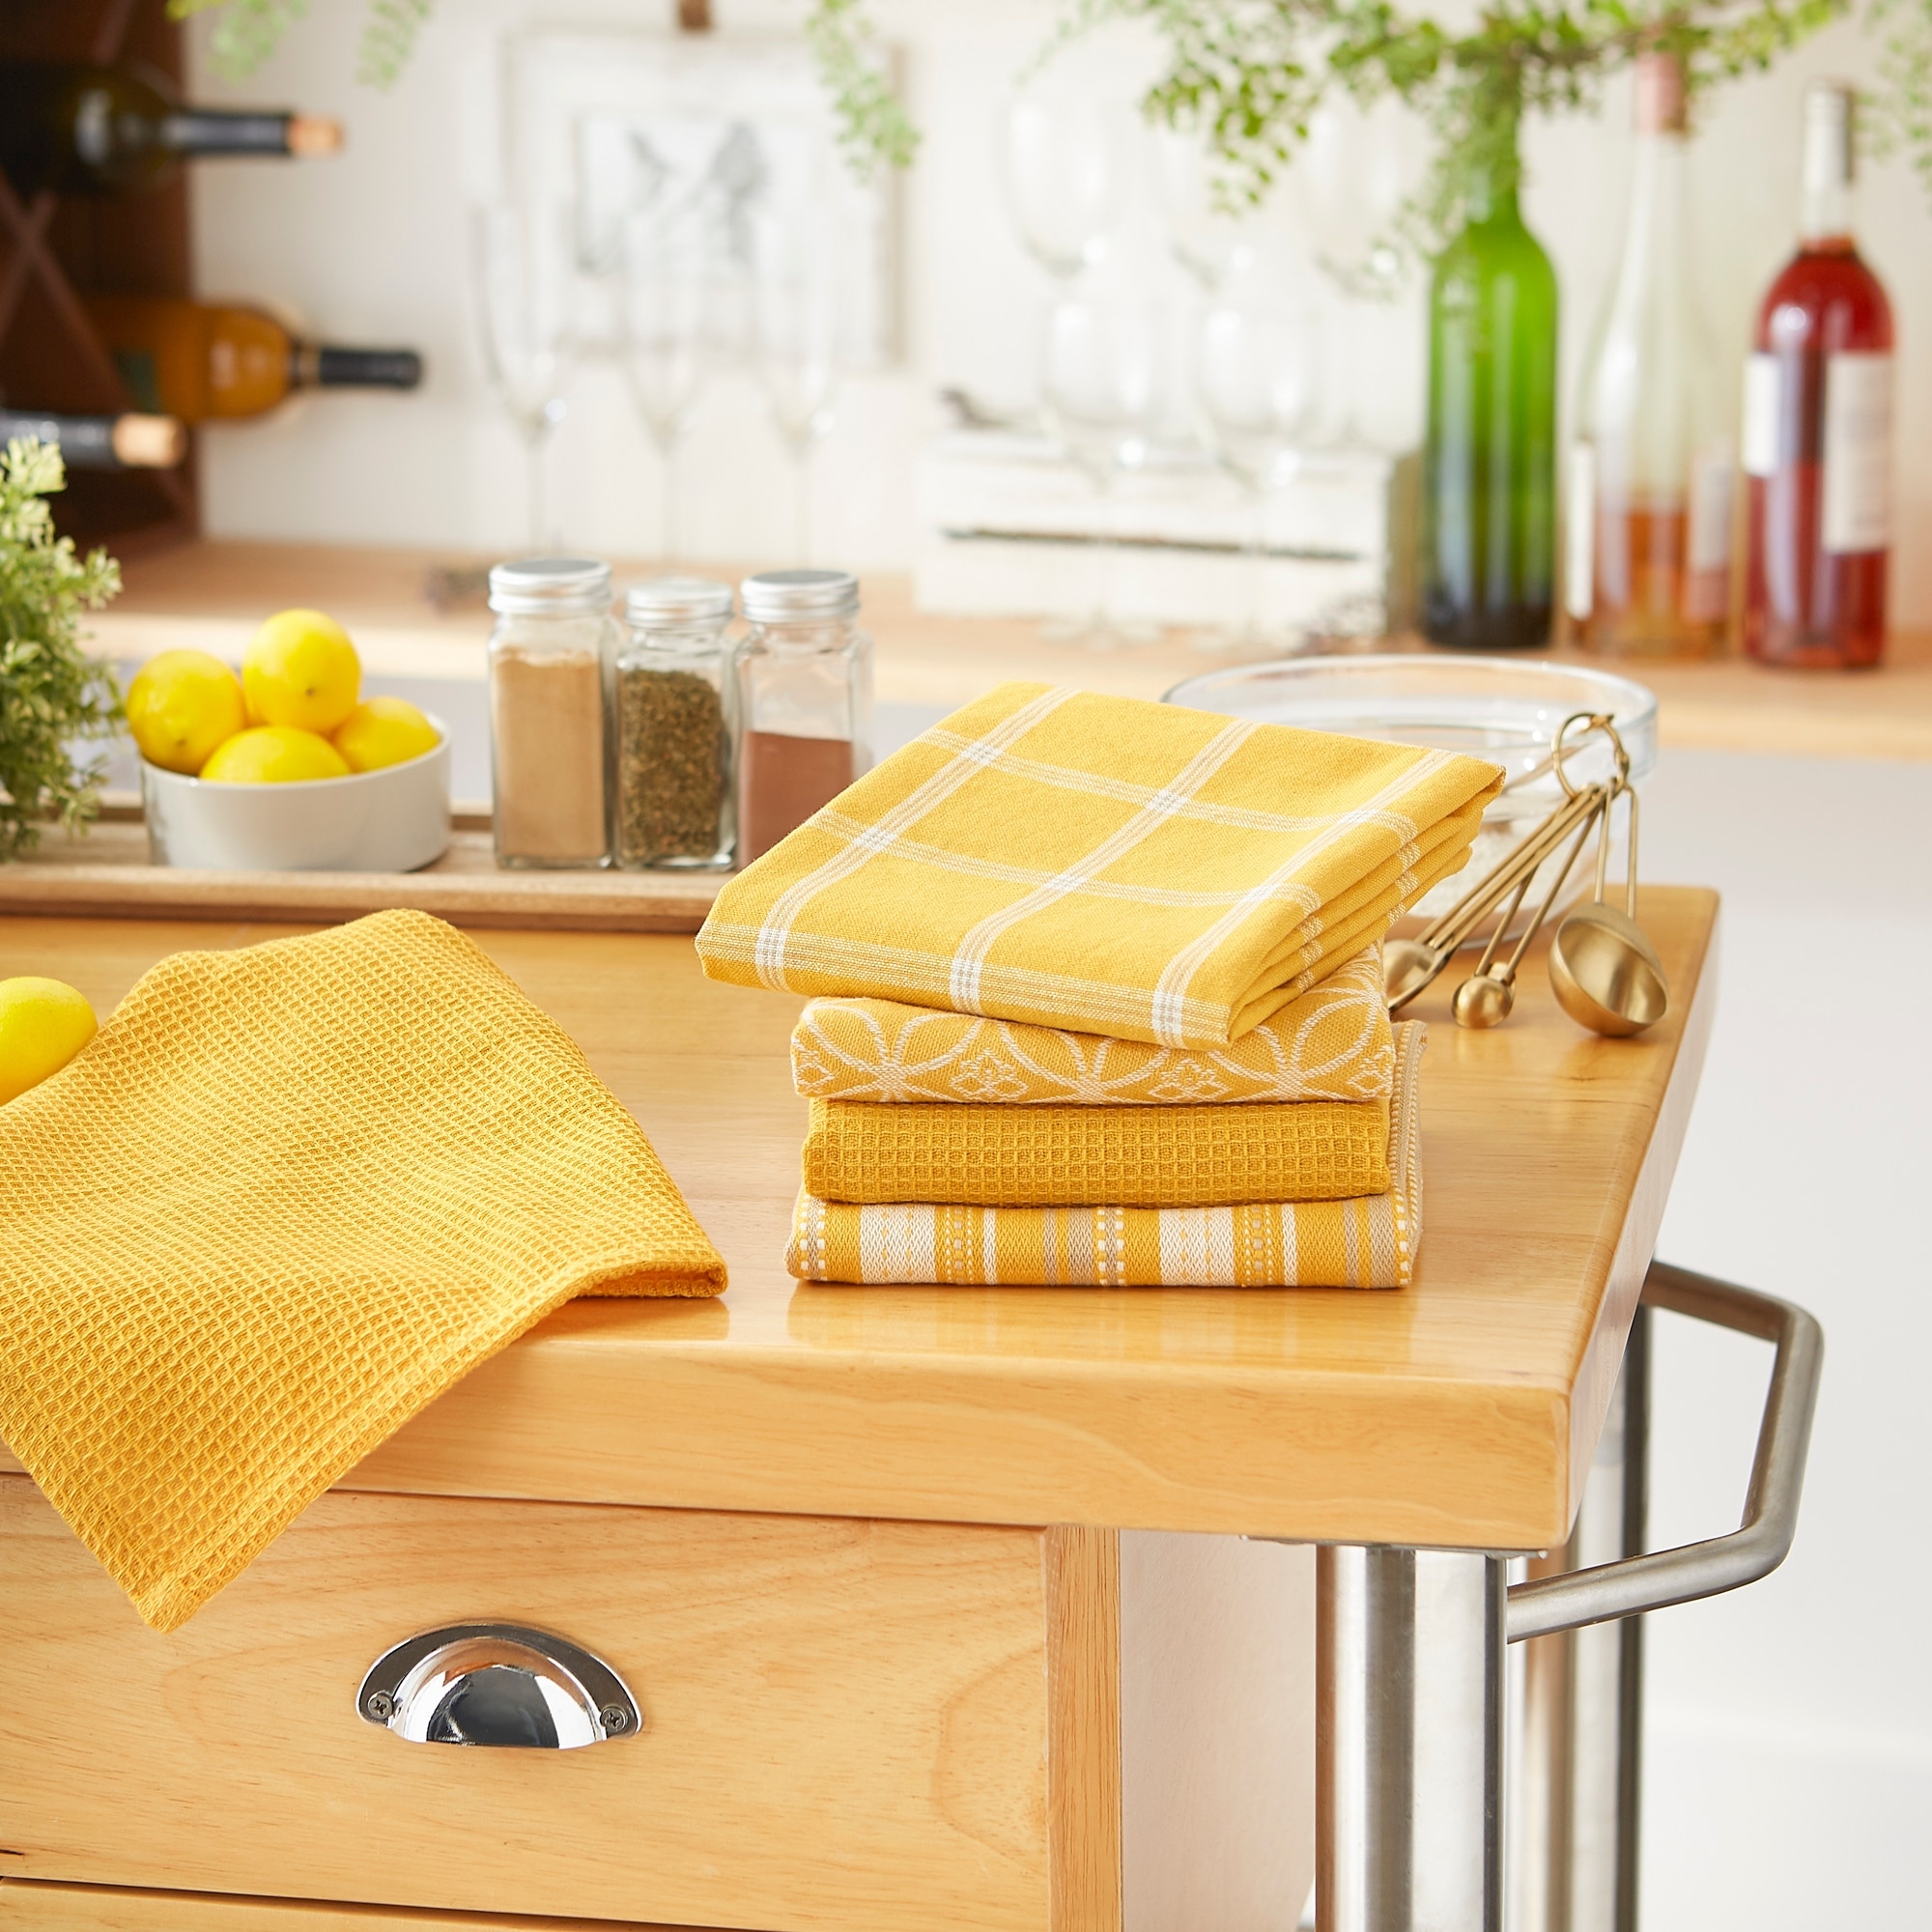 https://ak1.ostkcdn.com/images/products/is/images/direct/6aa79ad47cf91e1dae31ad13210e3f2d5832ac2b/DII-Assorted-Kitchen-Dishtowel-%26-Dishcloths-%28Set-of-5%29.jpg